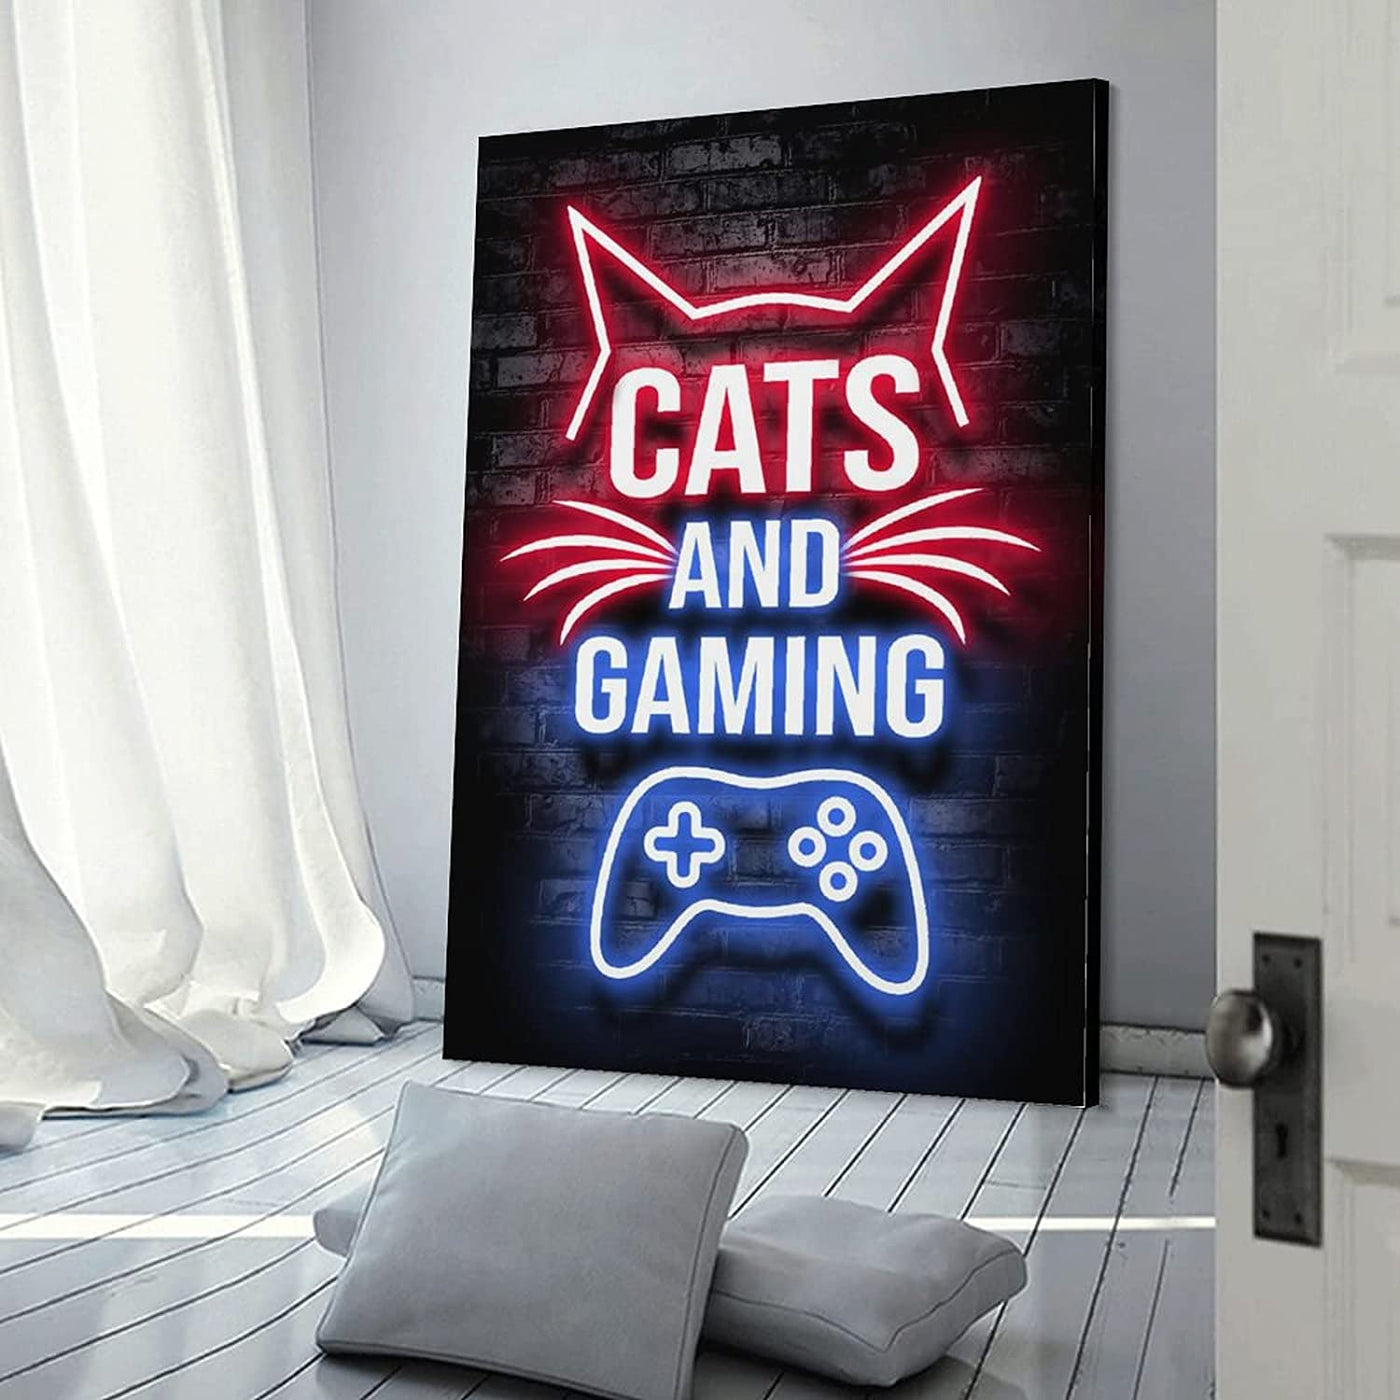 Cats and Gaming Neon Sign